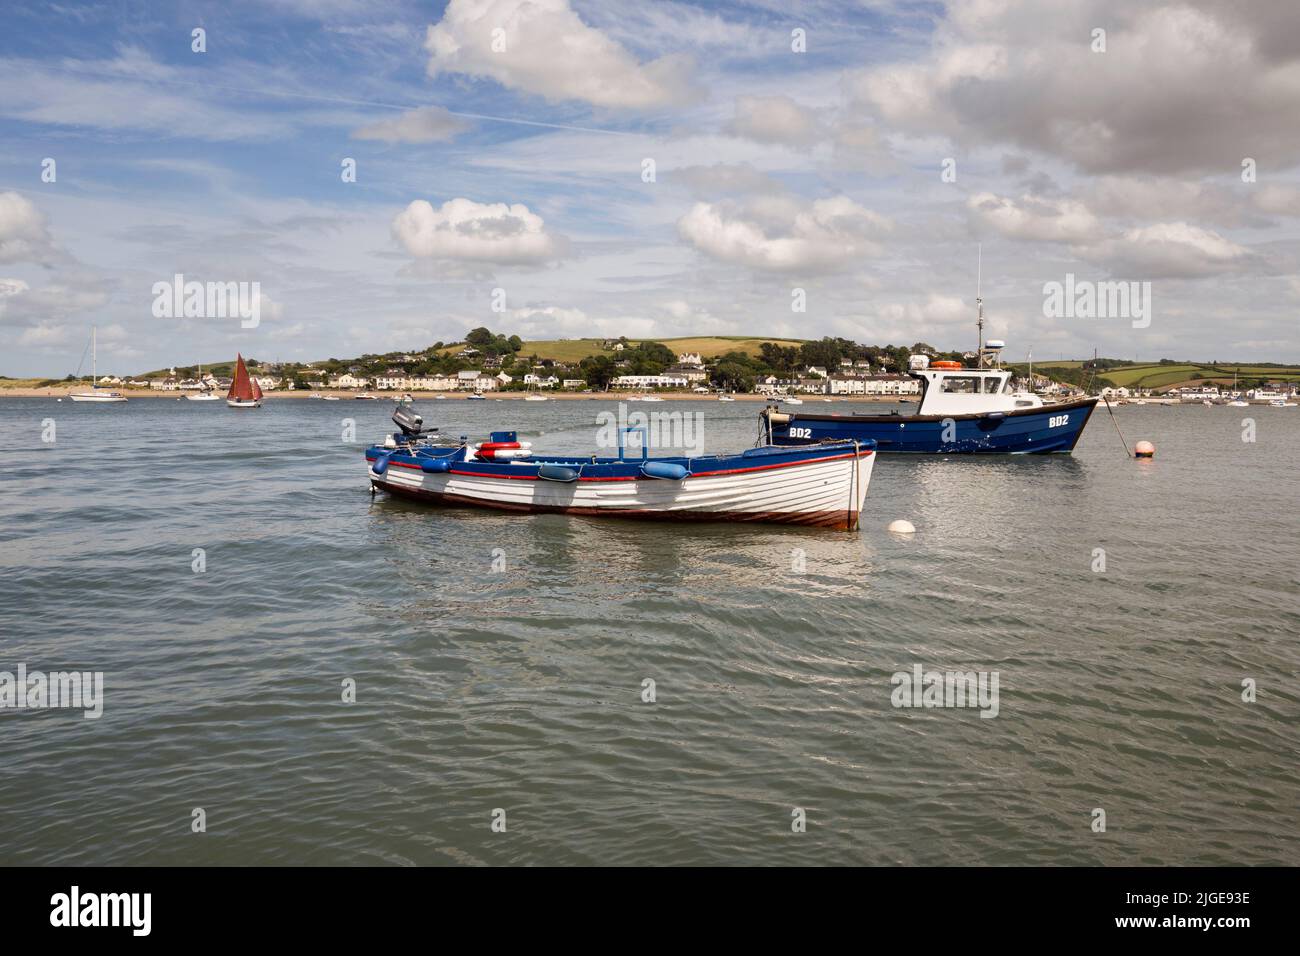 Boats moored at Appledore, with view across the bay to Instow, Devon, UK Stock Photo